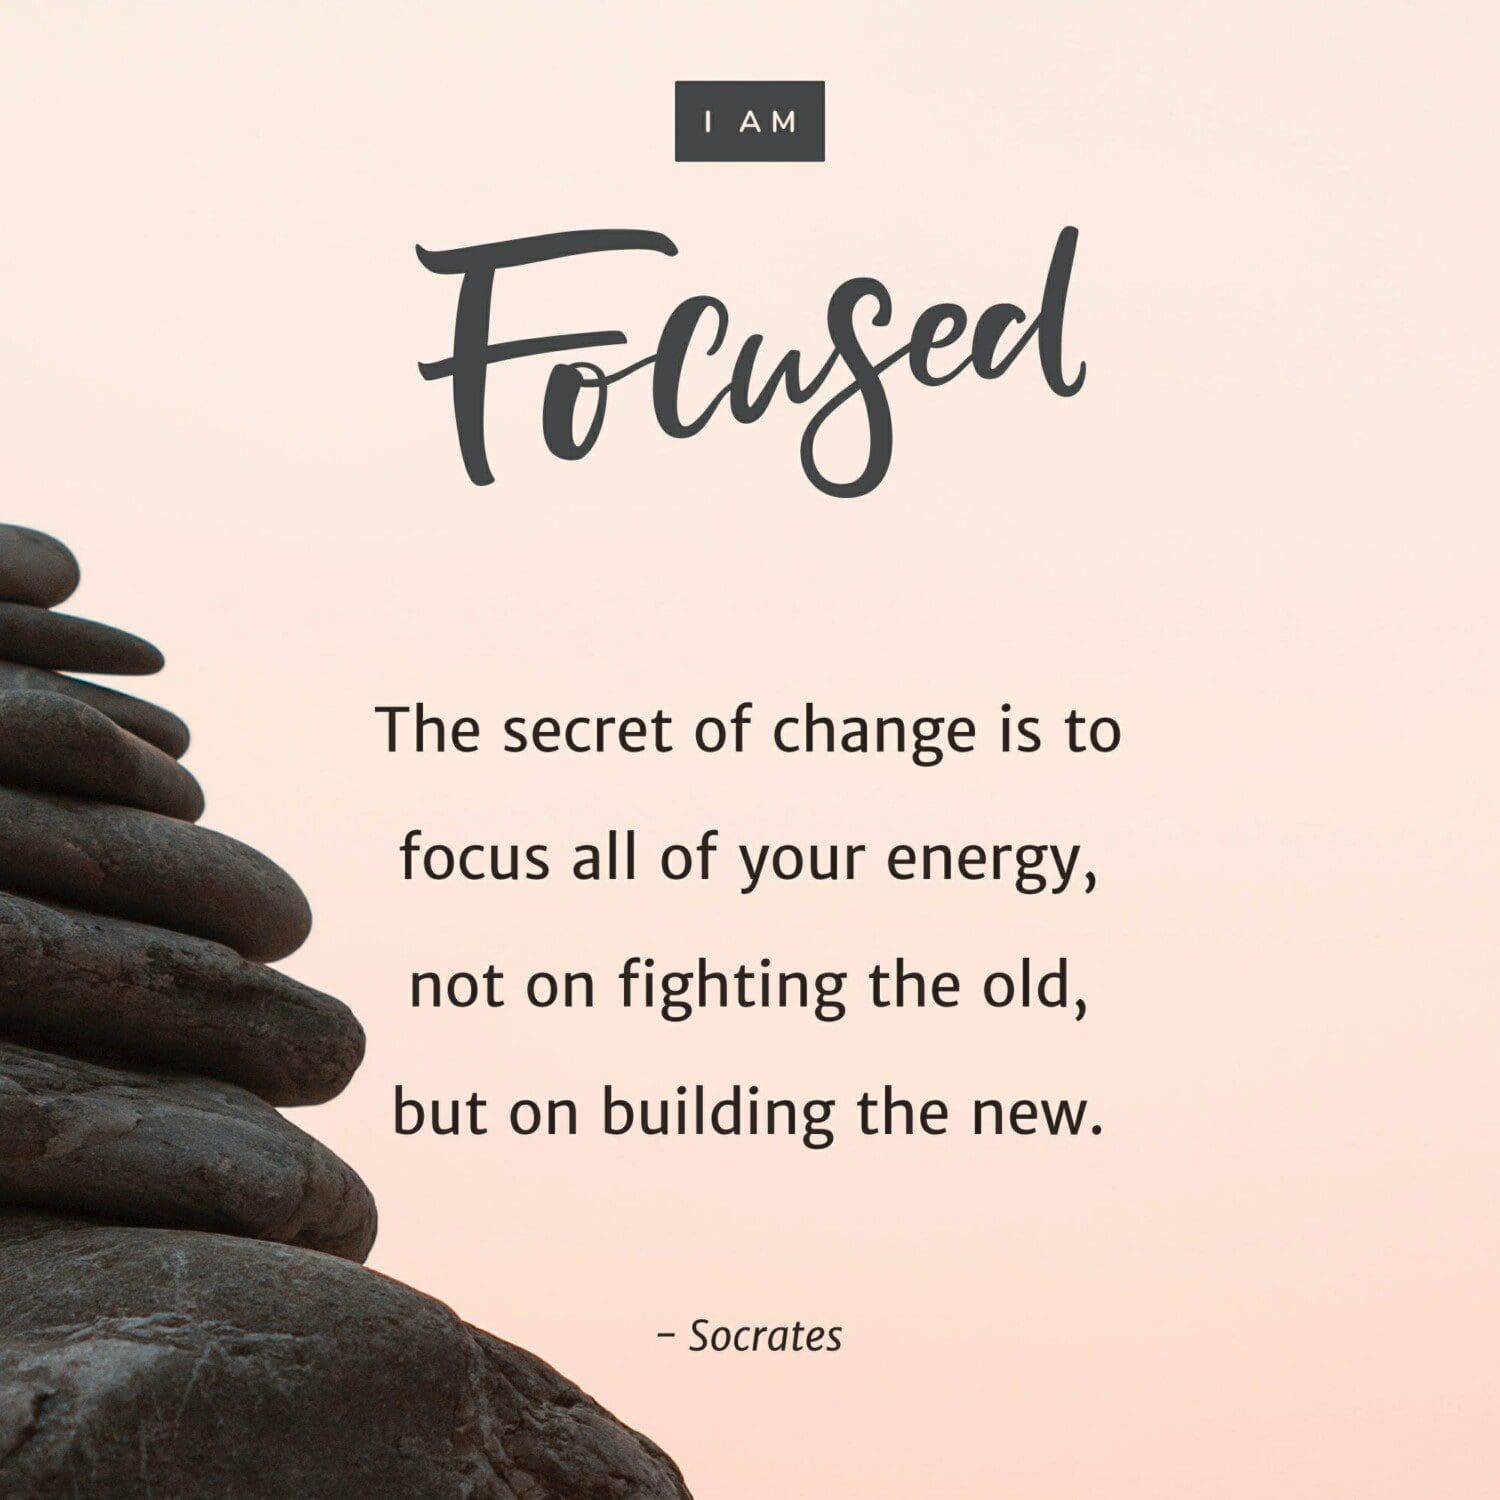 "The secret of change is to focus all of your energy, not on fighting the old, but on building the new." – Socrates